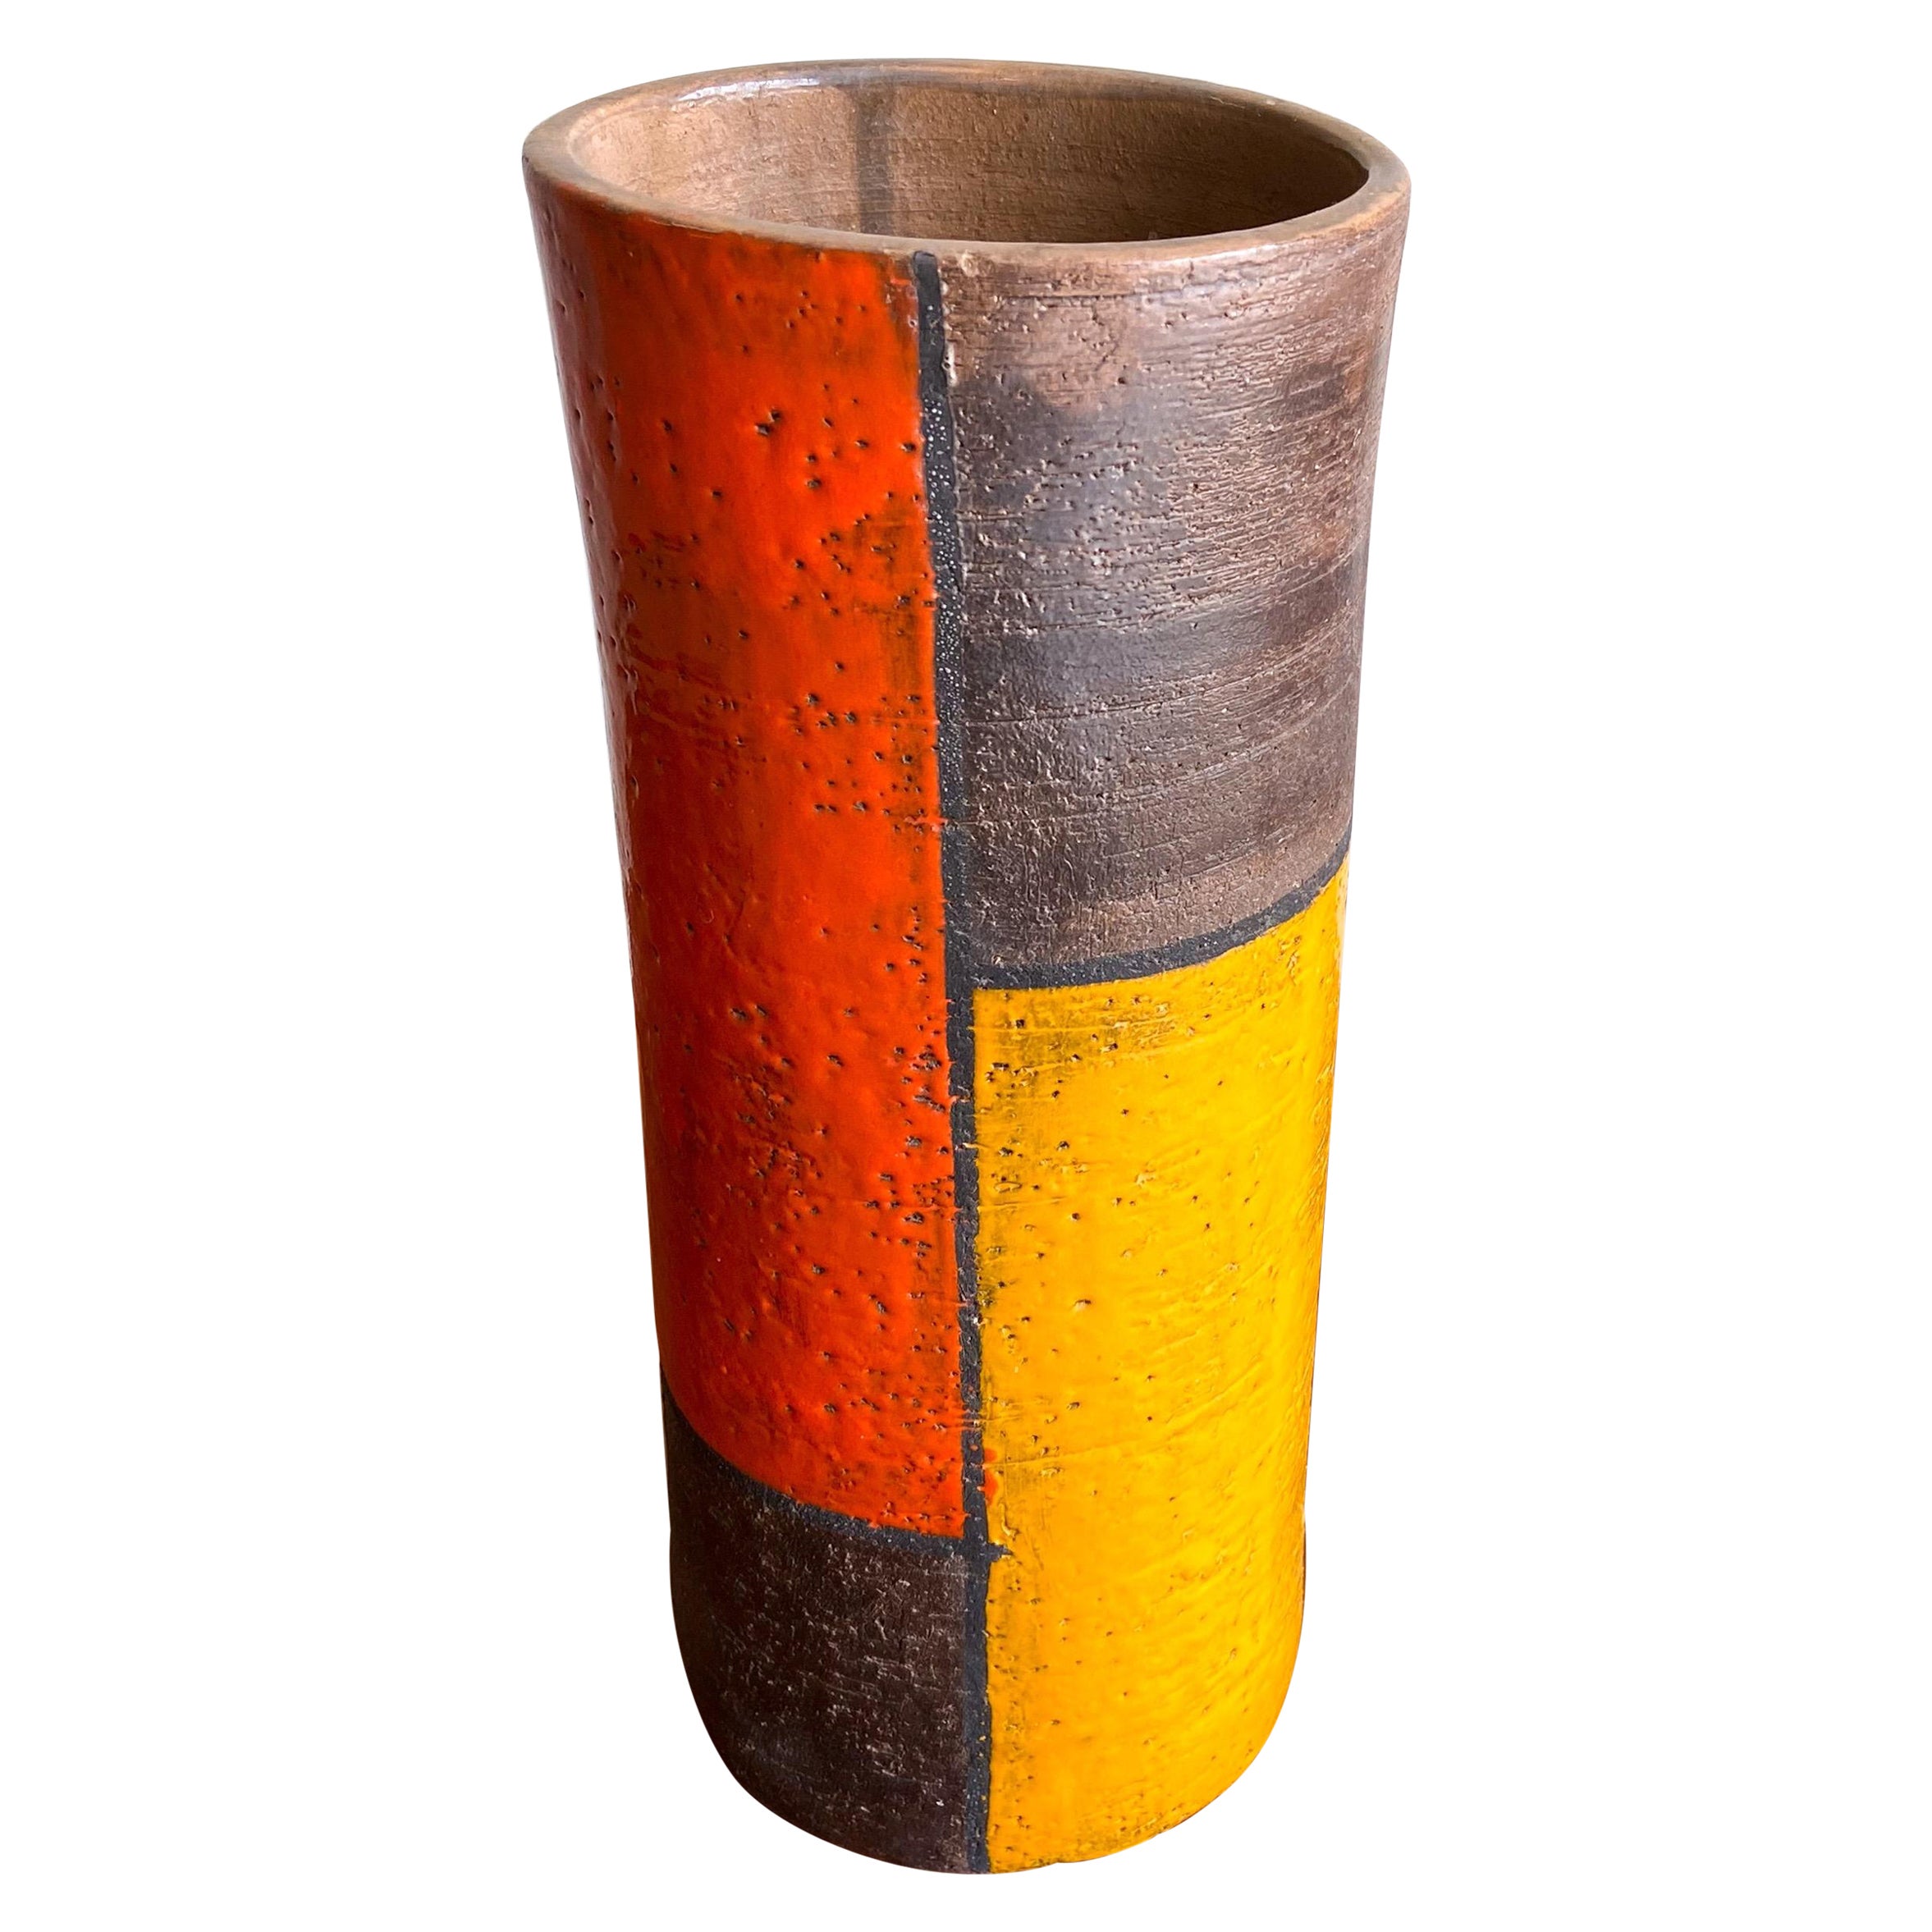 A large scale ceramic vase designed by Aldo Londi for Bitossi. Vibrant yellow and orange glaze over a textured brown clay body. Signed to the underside.